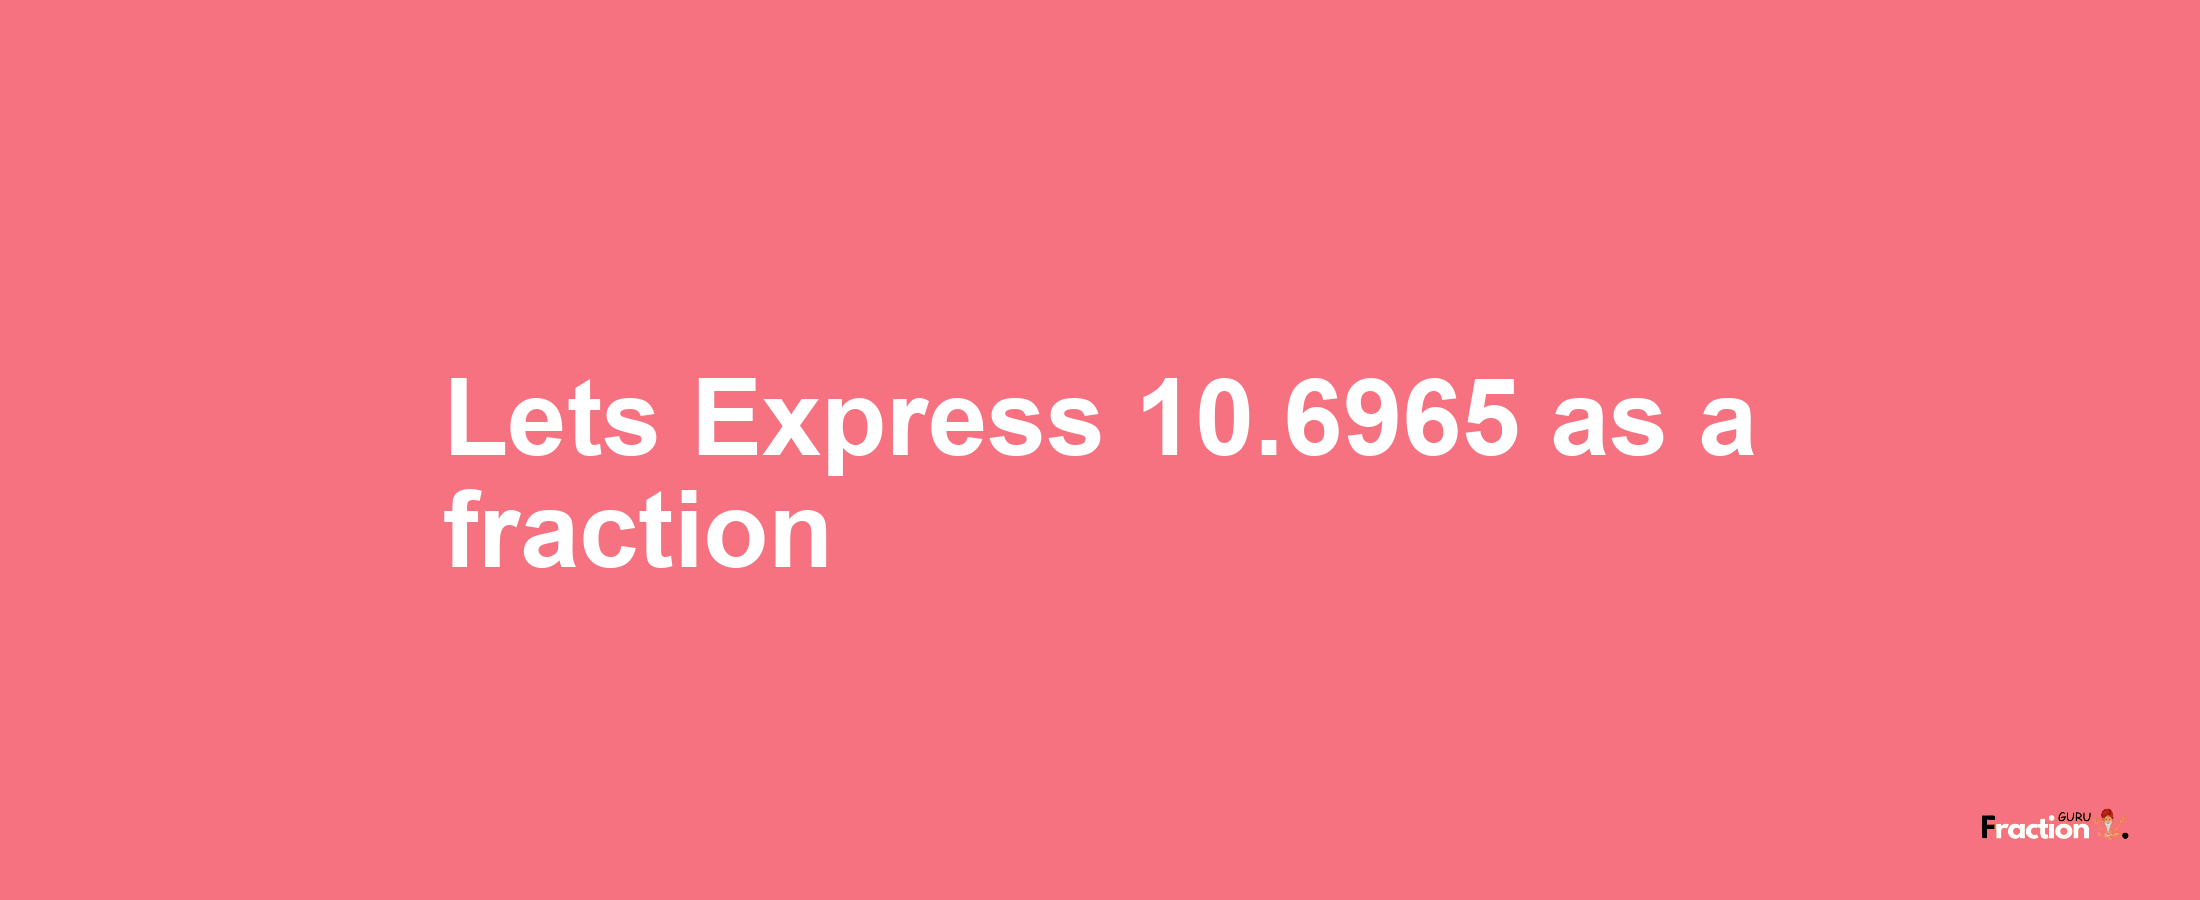 Lets Express 10.6965 as afraction